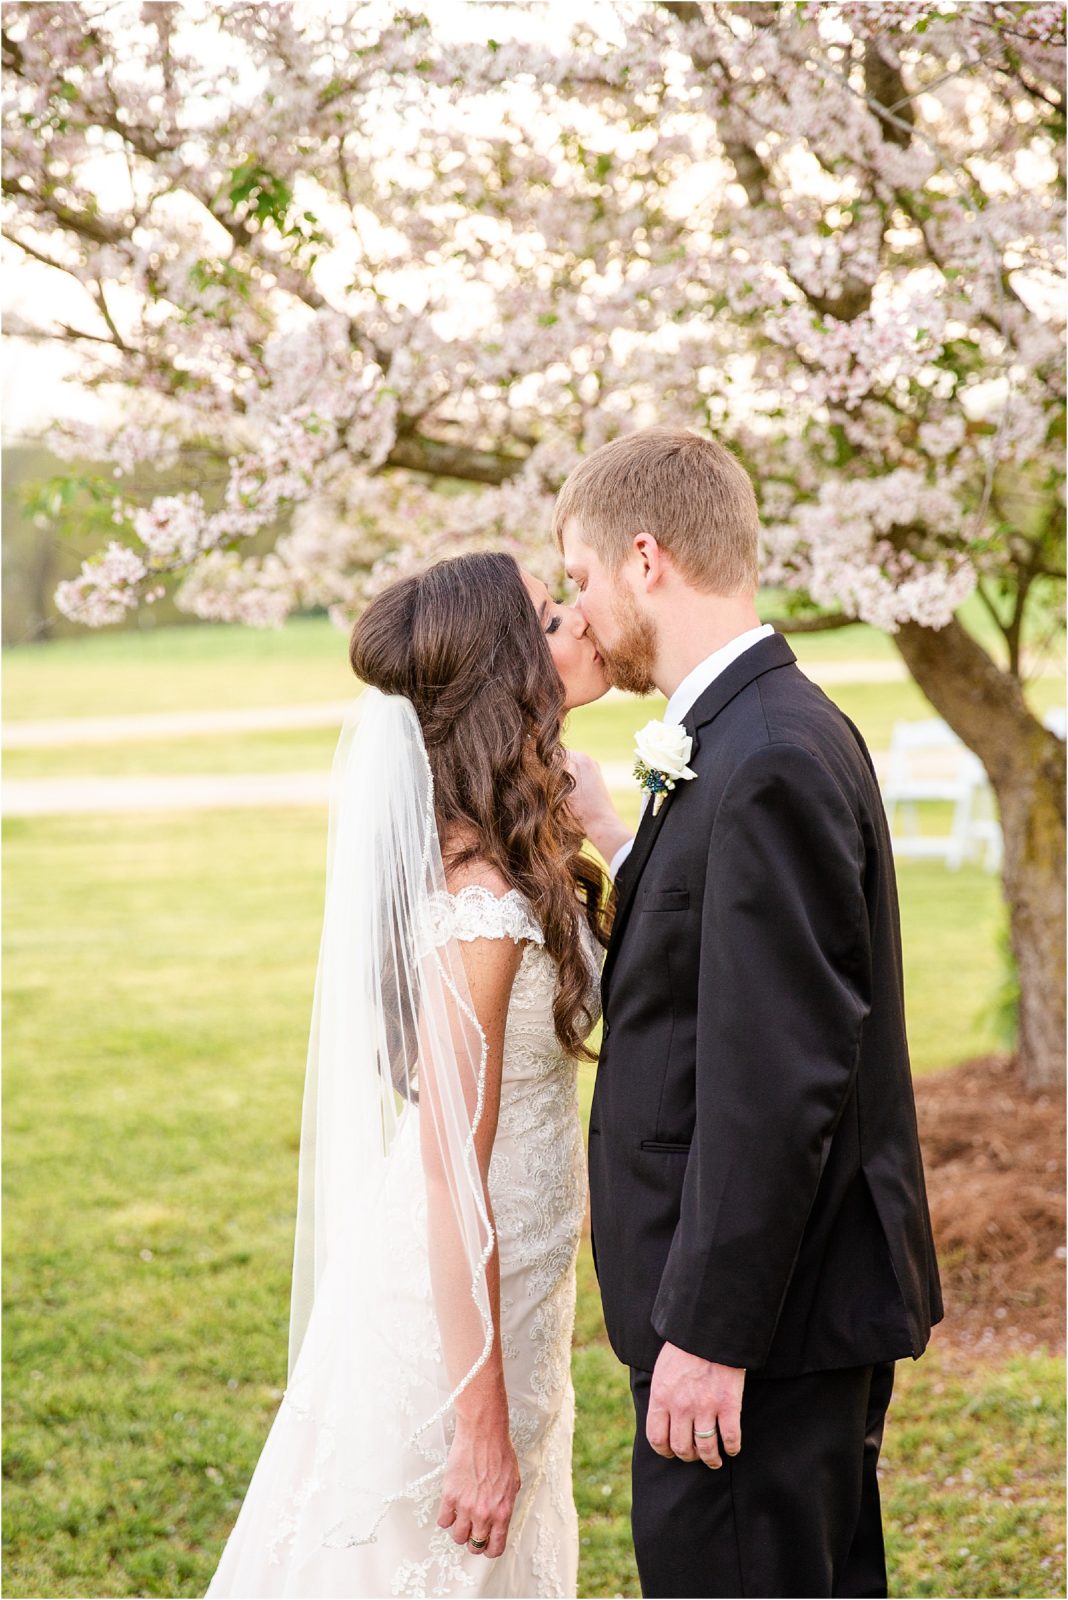 Wedding couple kissing after ceremony